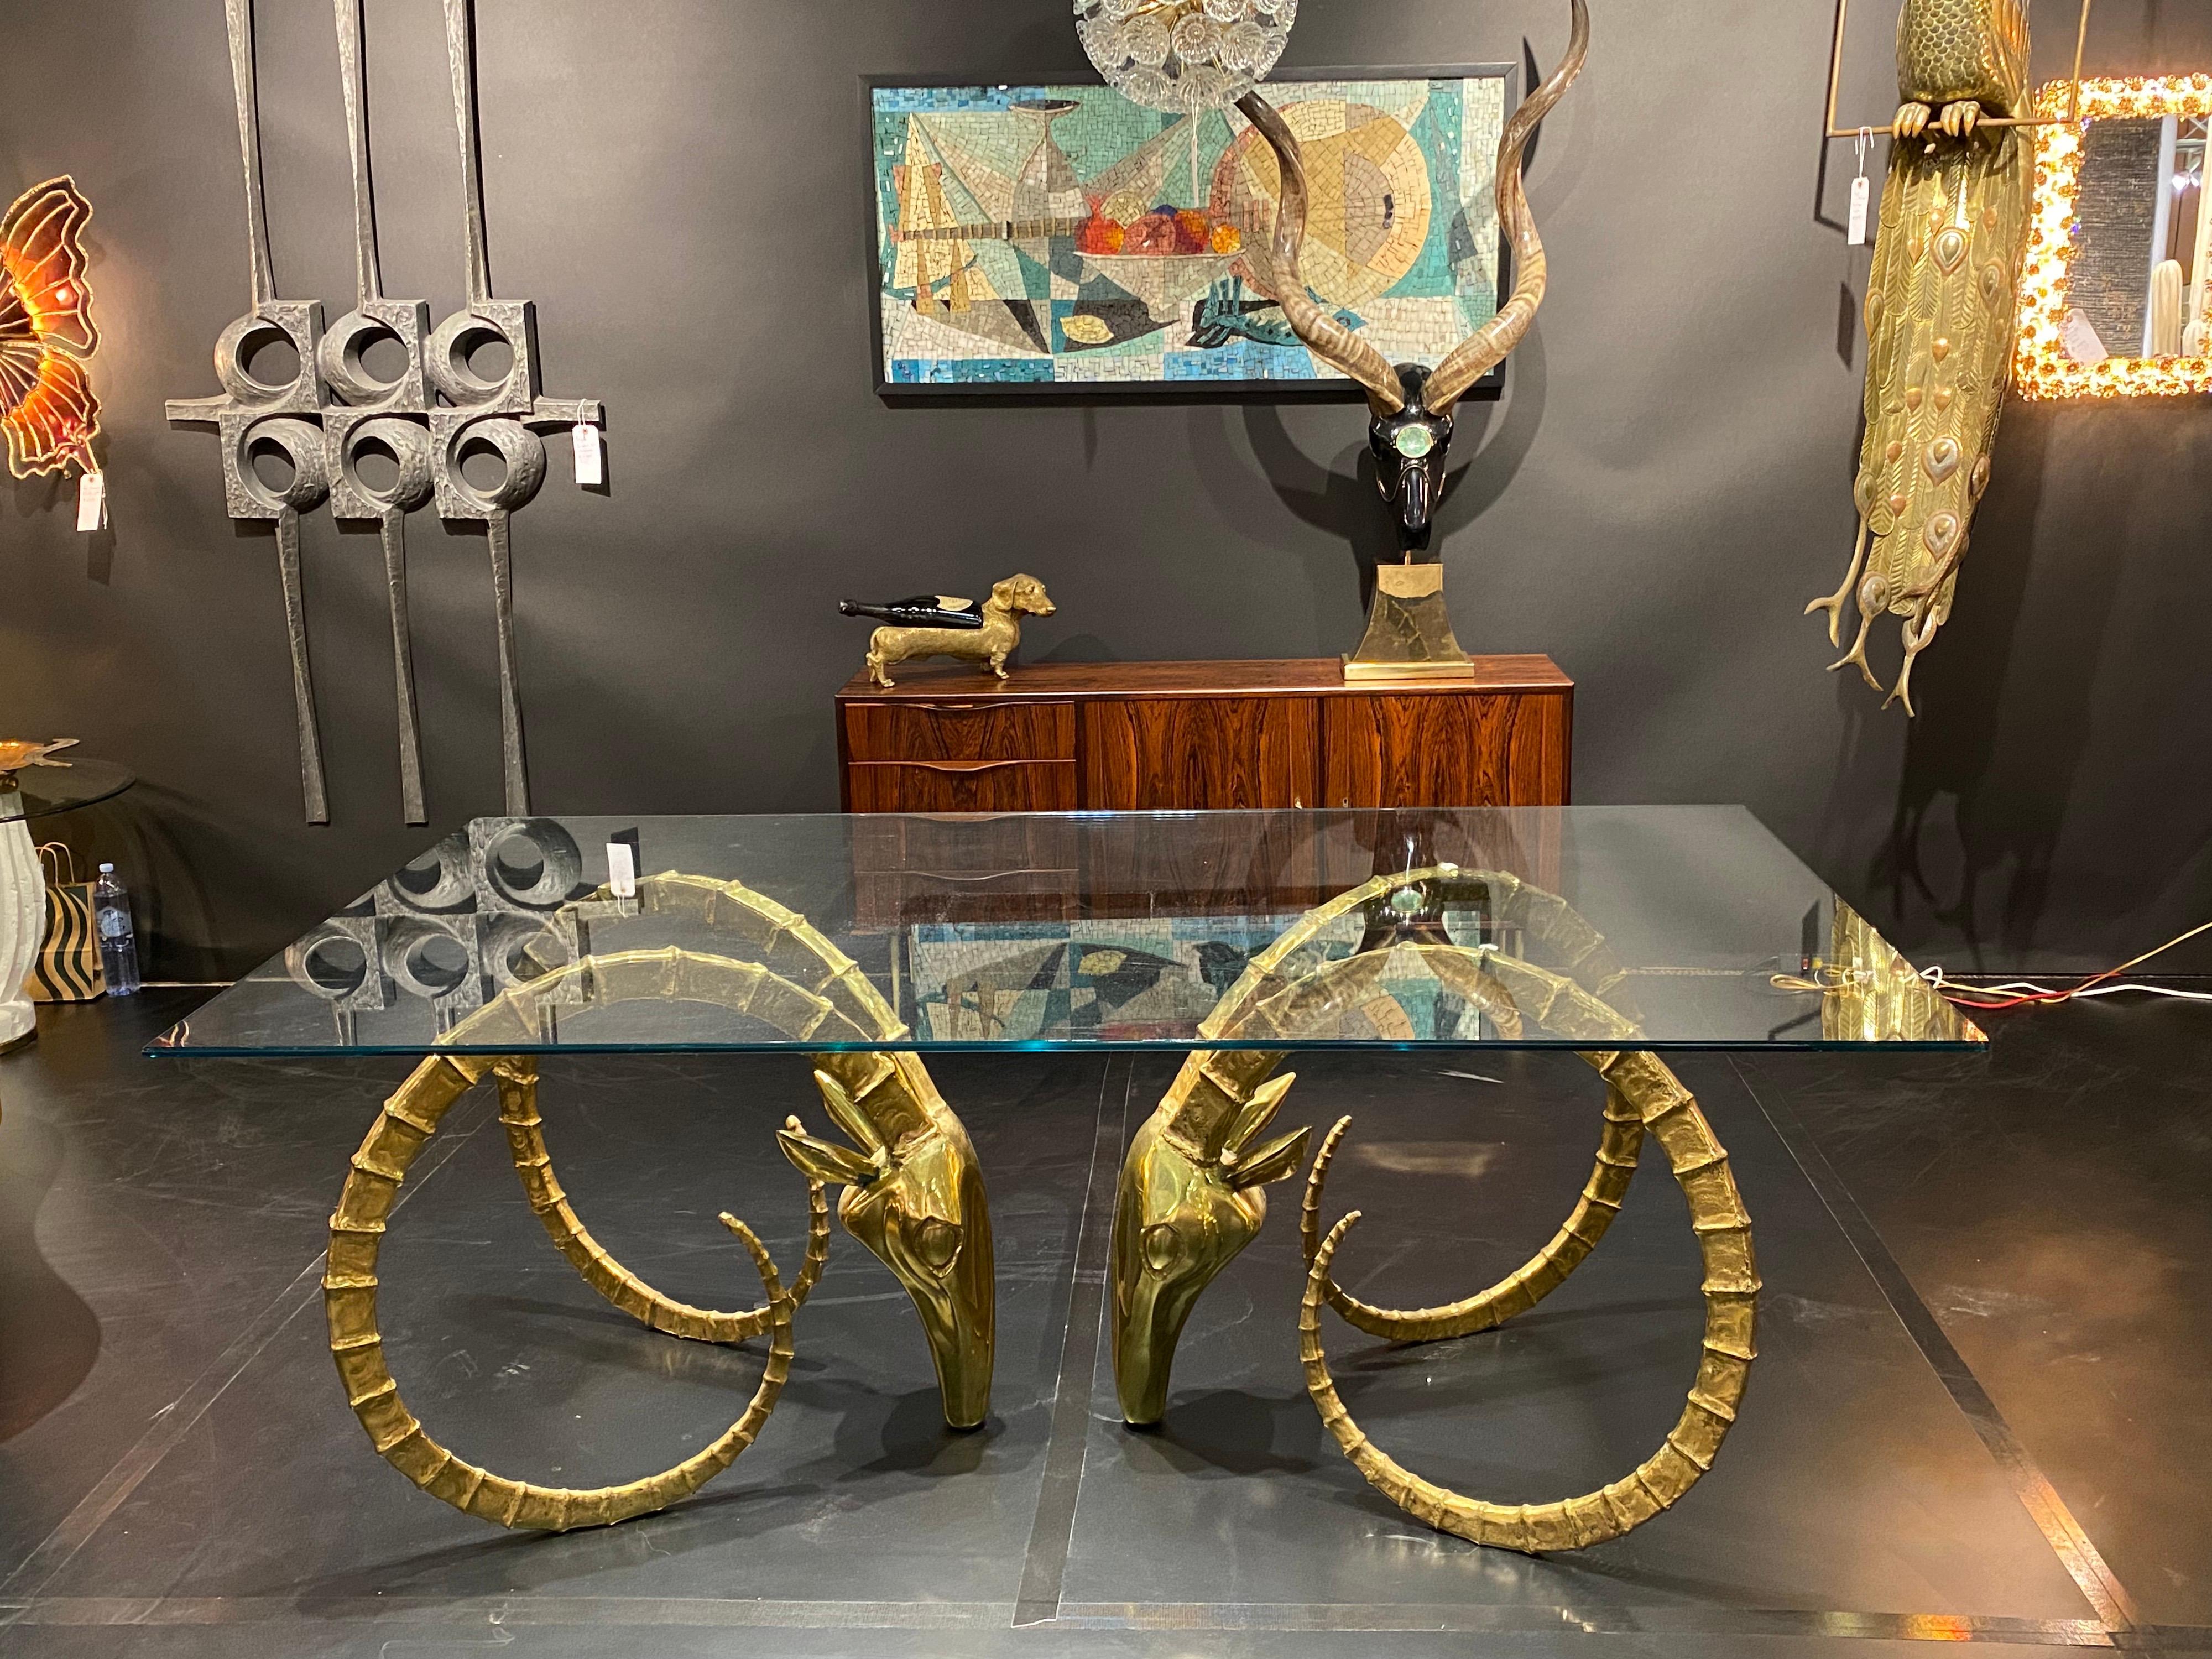 Signed 3/150 Alain Chervet brass Ibex dining table or desk. Glass top shown is 76” x 42” and not included. We suggest getting glass top locally in your desired size. It will hold much bigger and heavier glass top. Each base measures 28.5” high, 31”